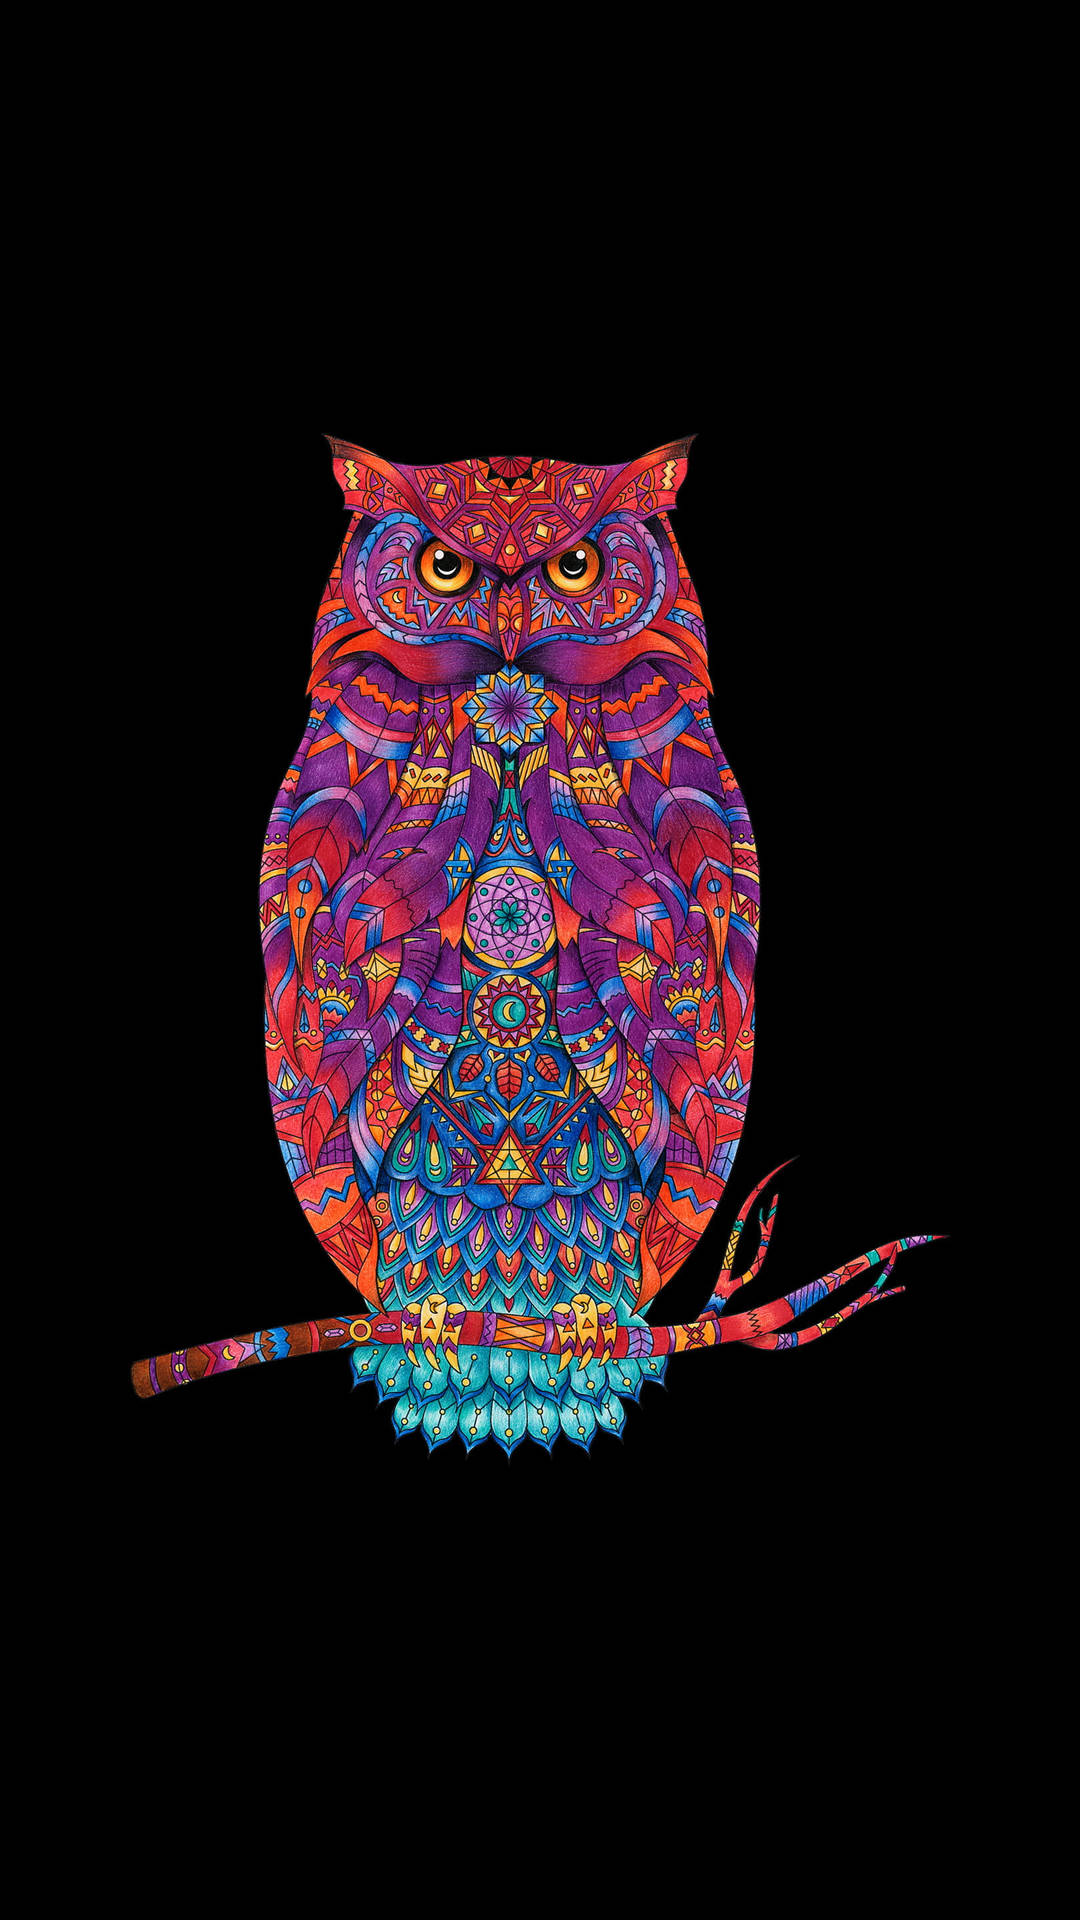 Caption: Stunning And Colorful Owl Hd Tattoo Art Image Wallpaper